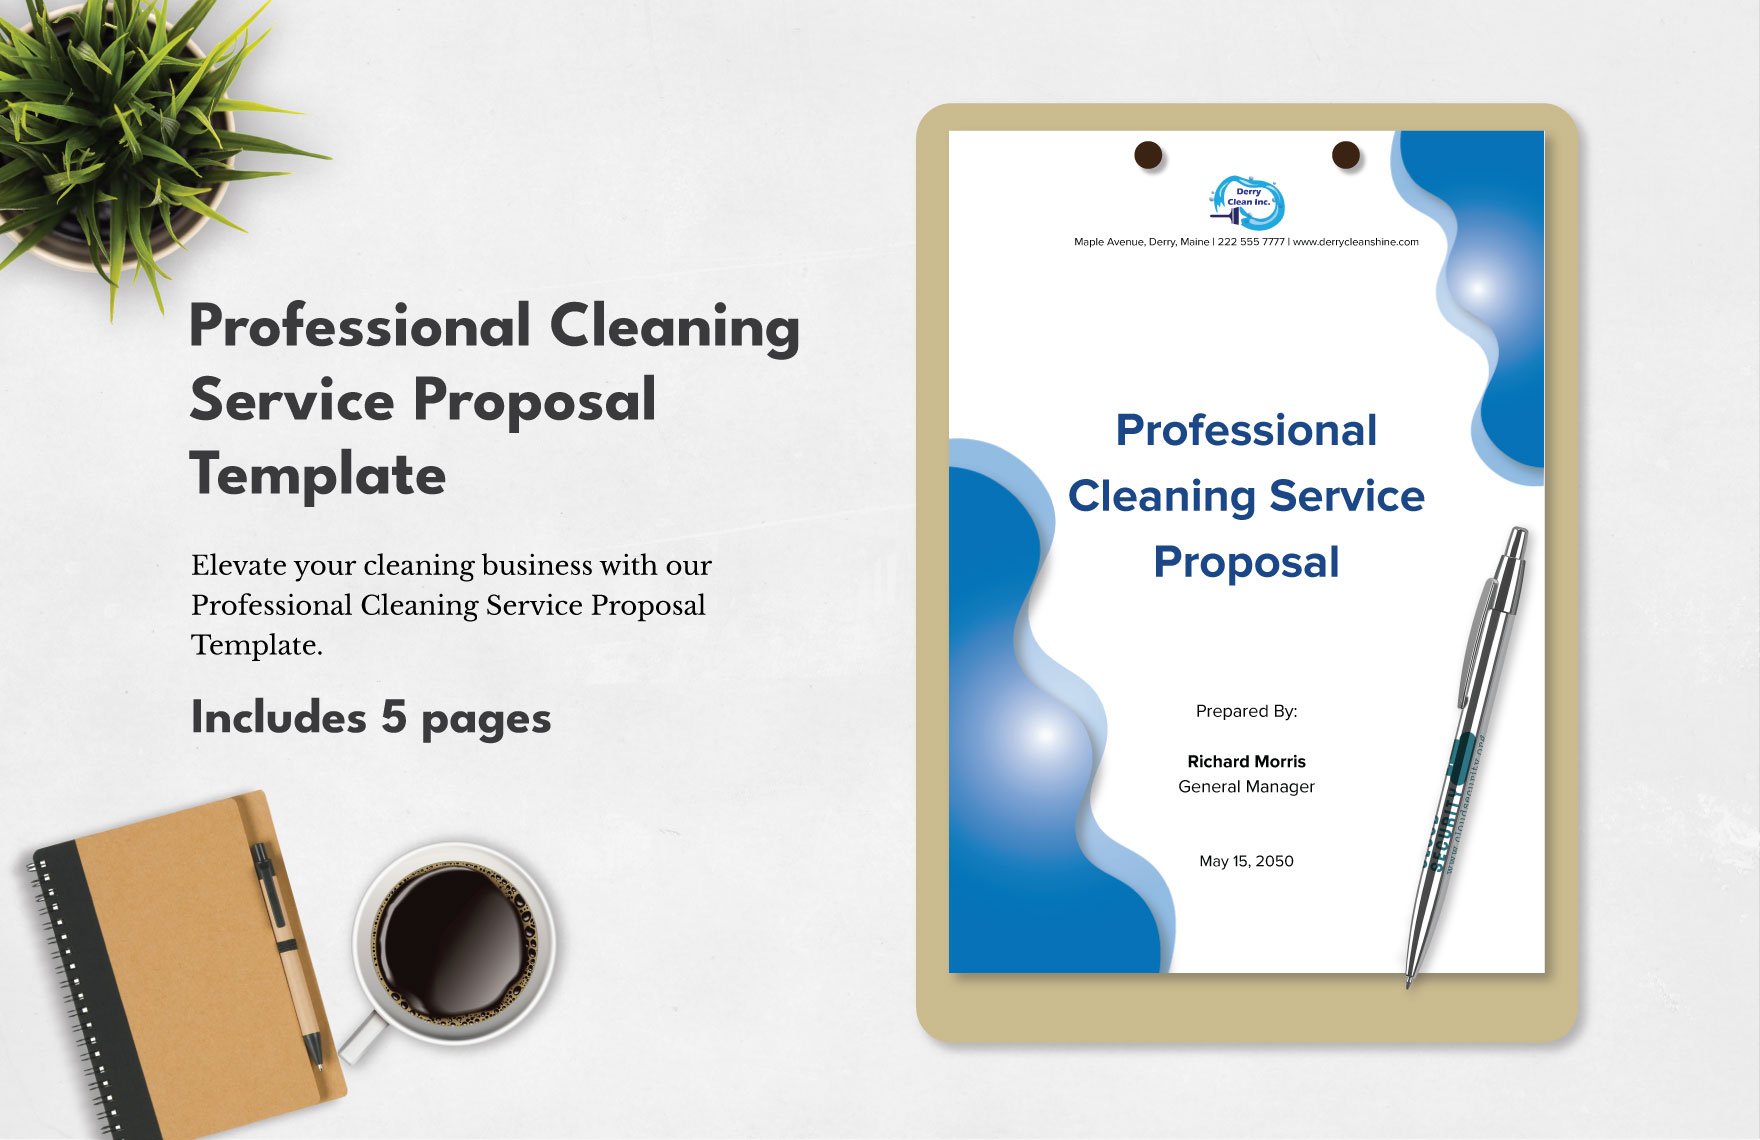 Professional Cleaning Service Proposal Template